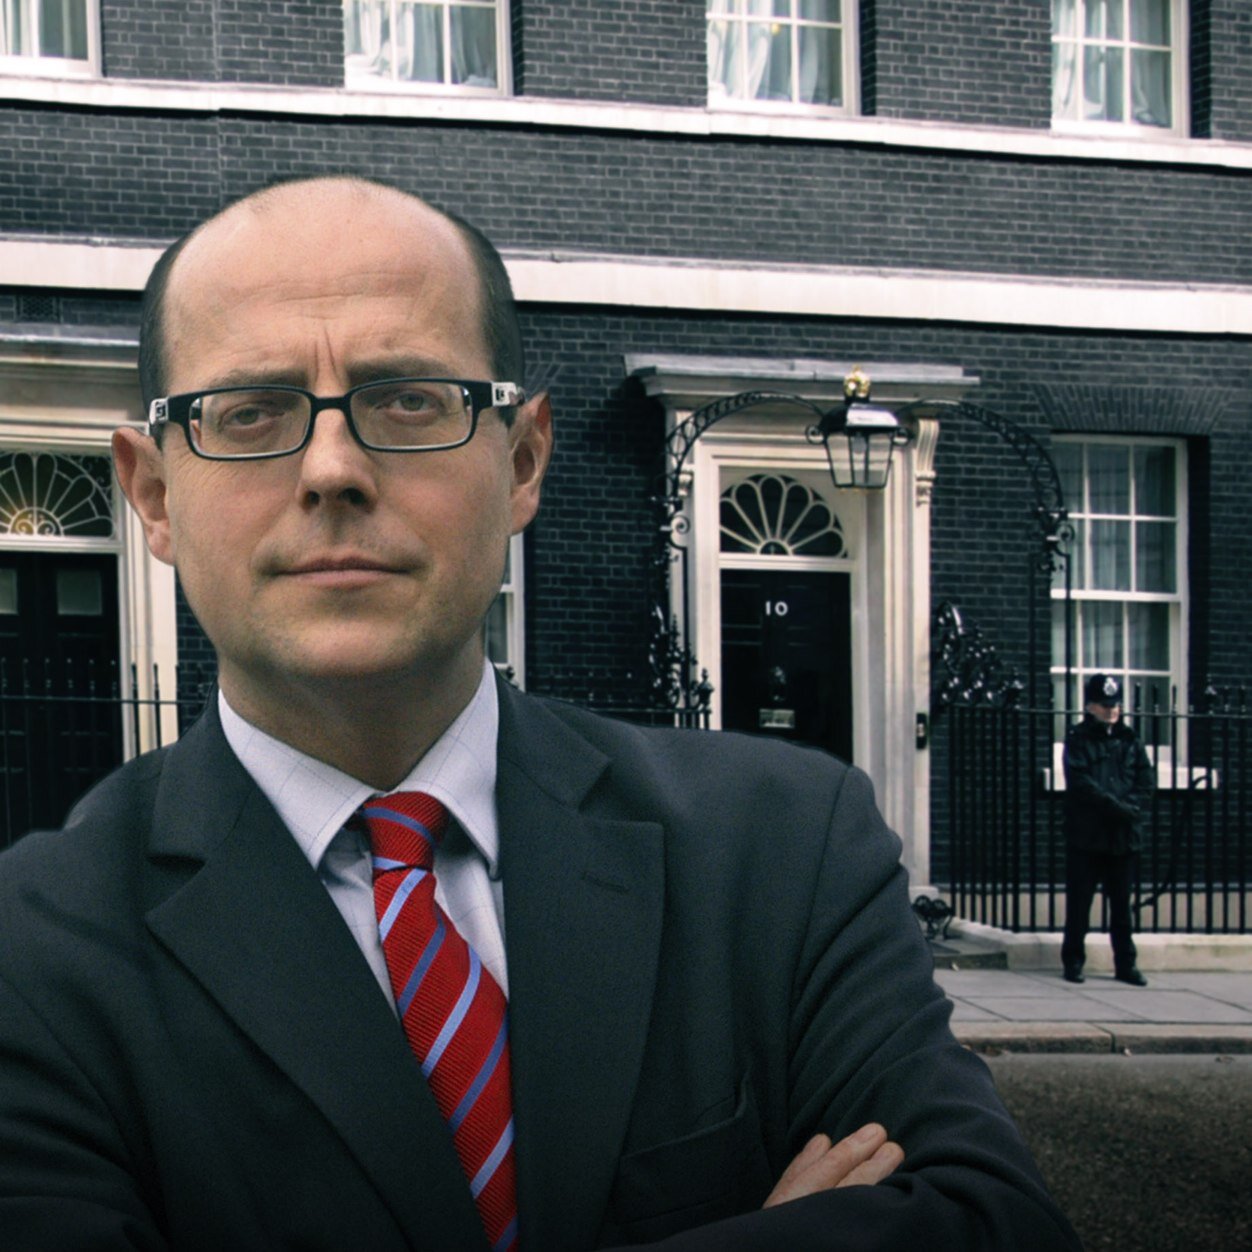 BBC political editor Nick Robinson was heckled by independence supporters at a rally in Perth